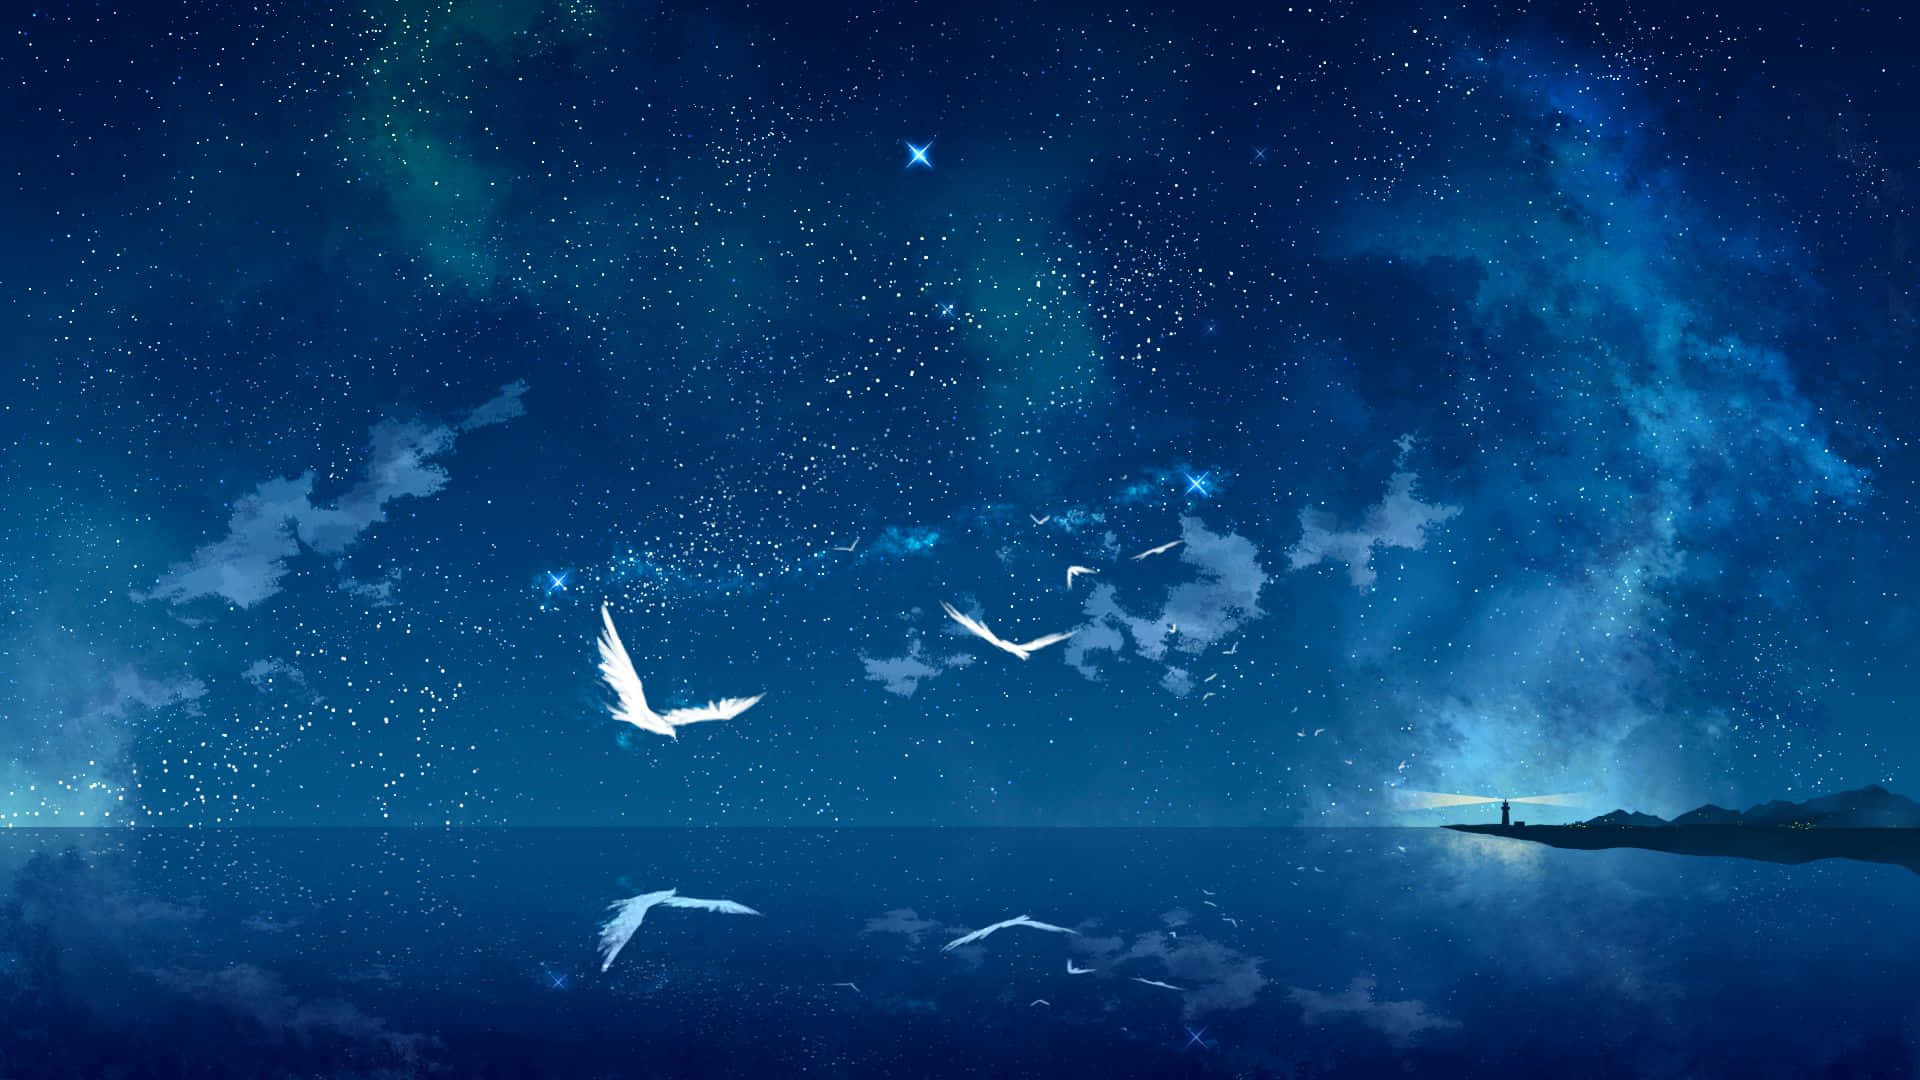 Magical Night Sky With Seagulls Flying Over Blue Sea Wallpaper